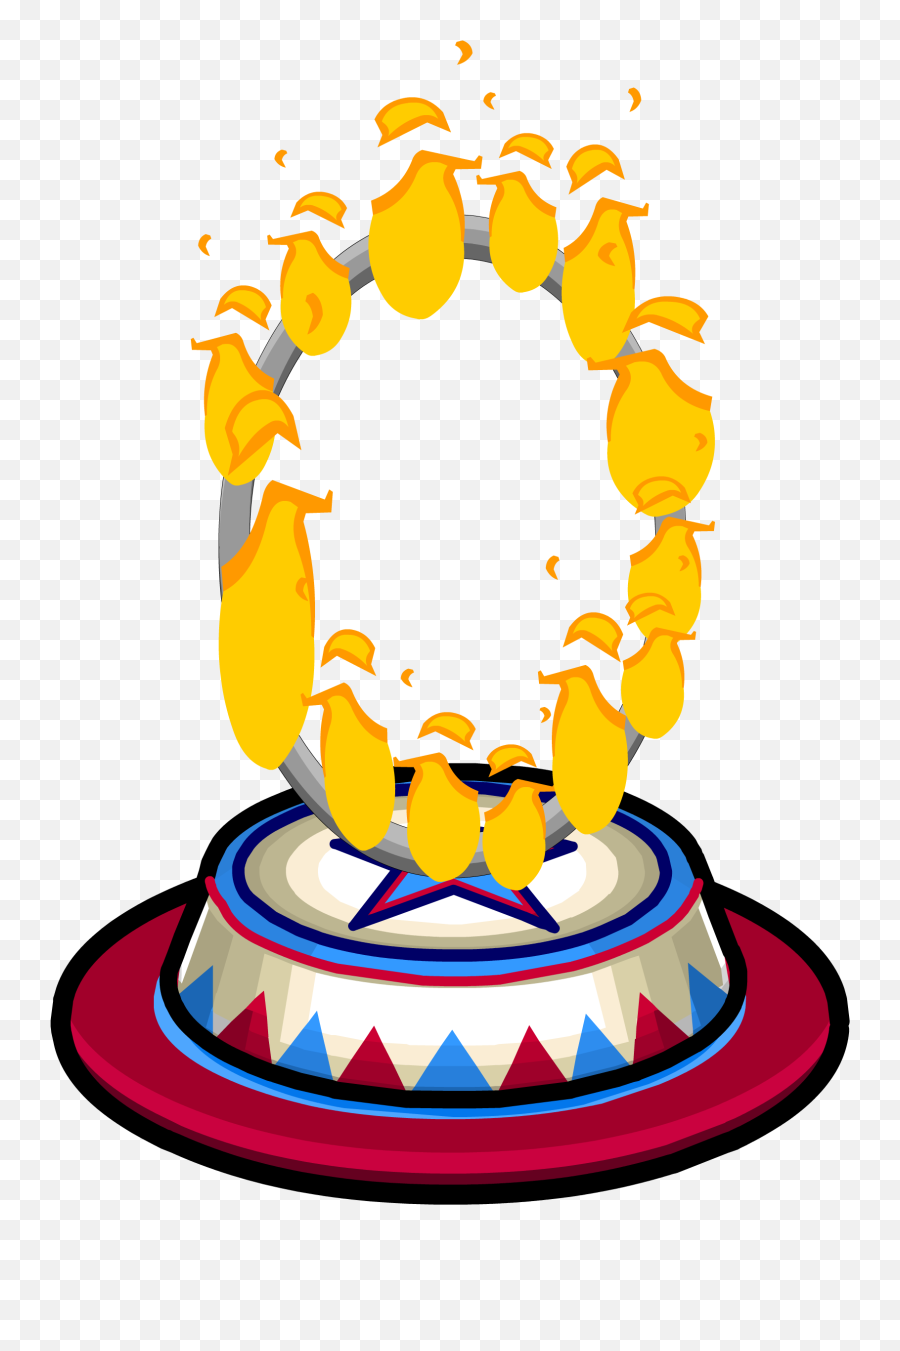 Ring O Fire - Ring Of Fire Club Penguin Emoji,Ring Of Fire Png